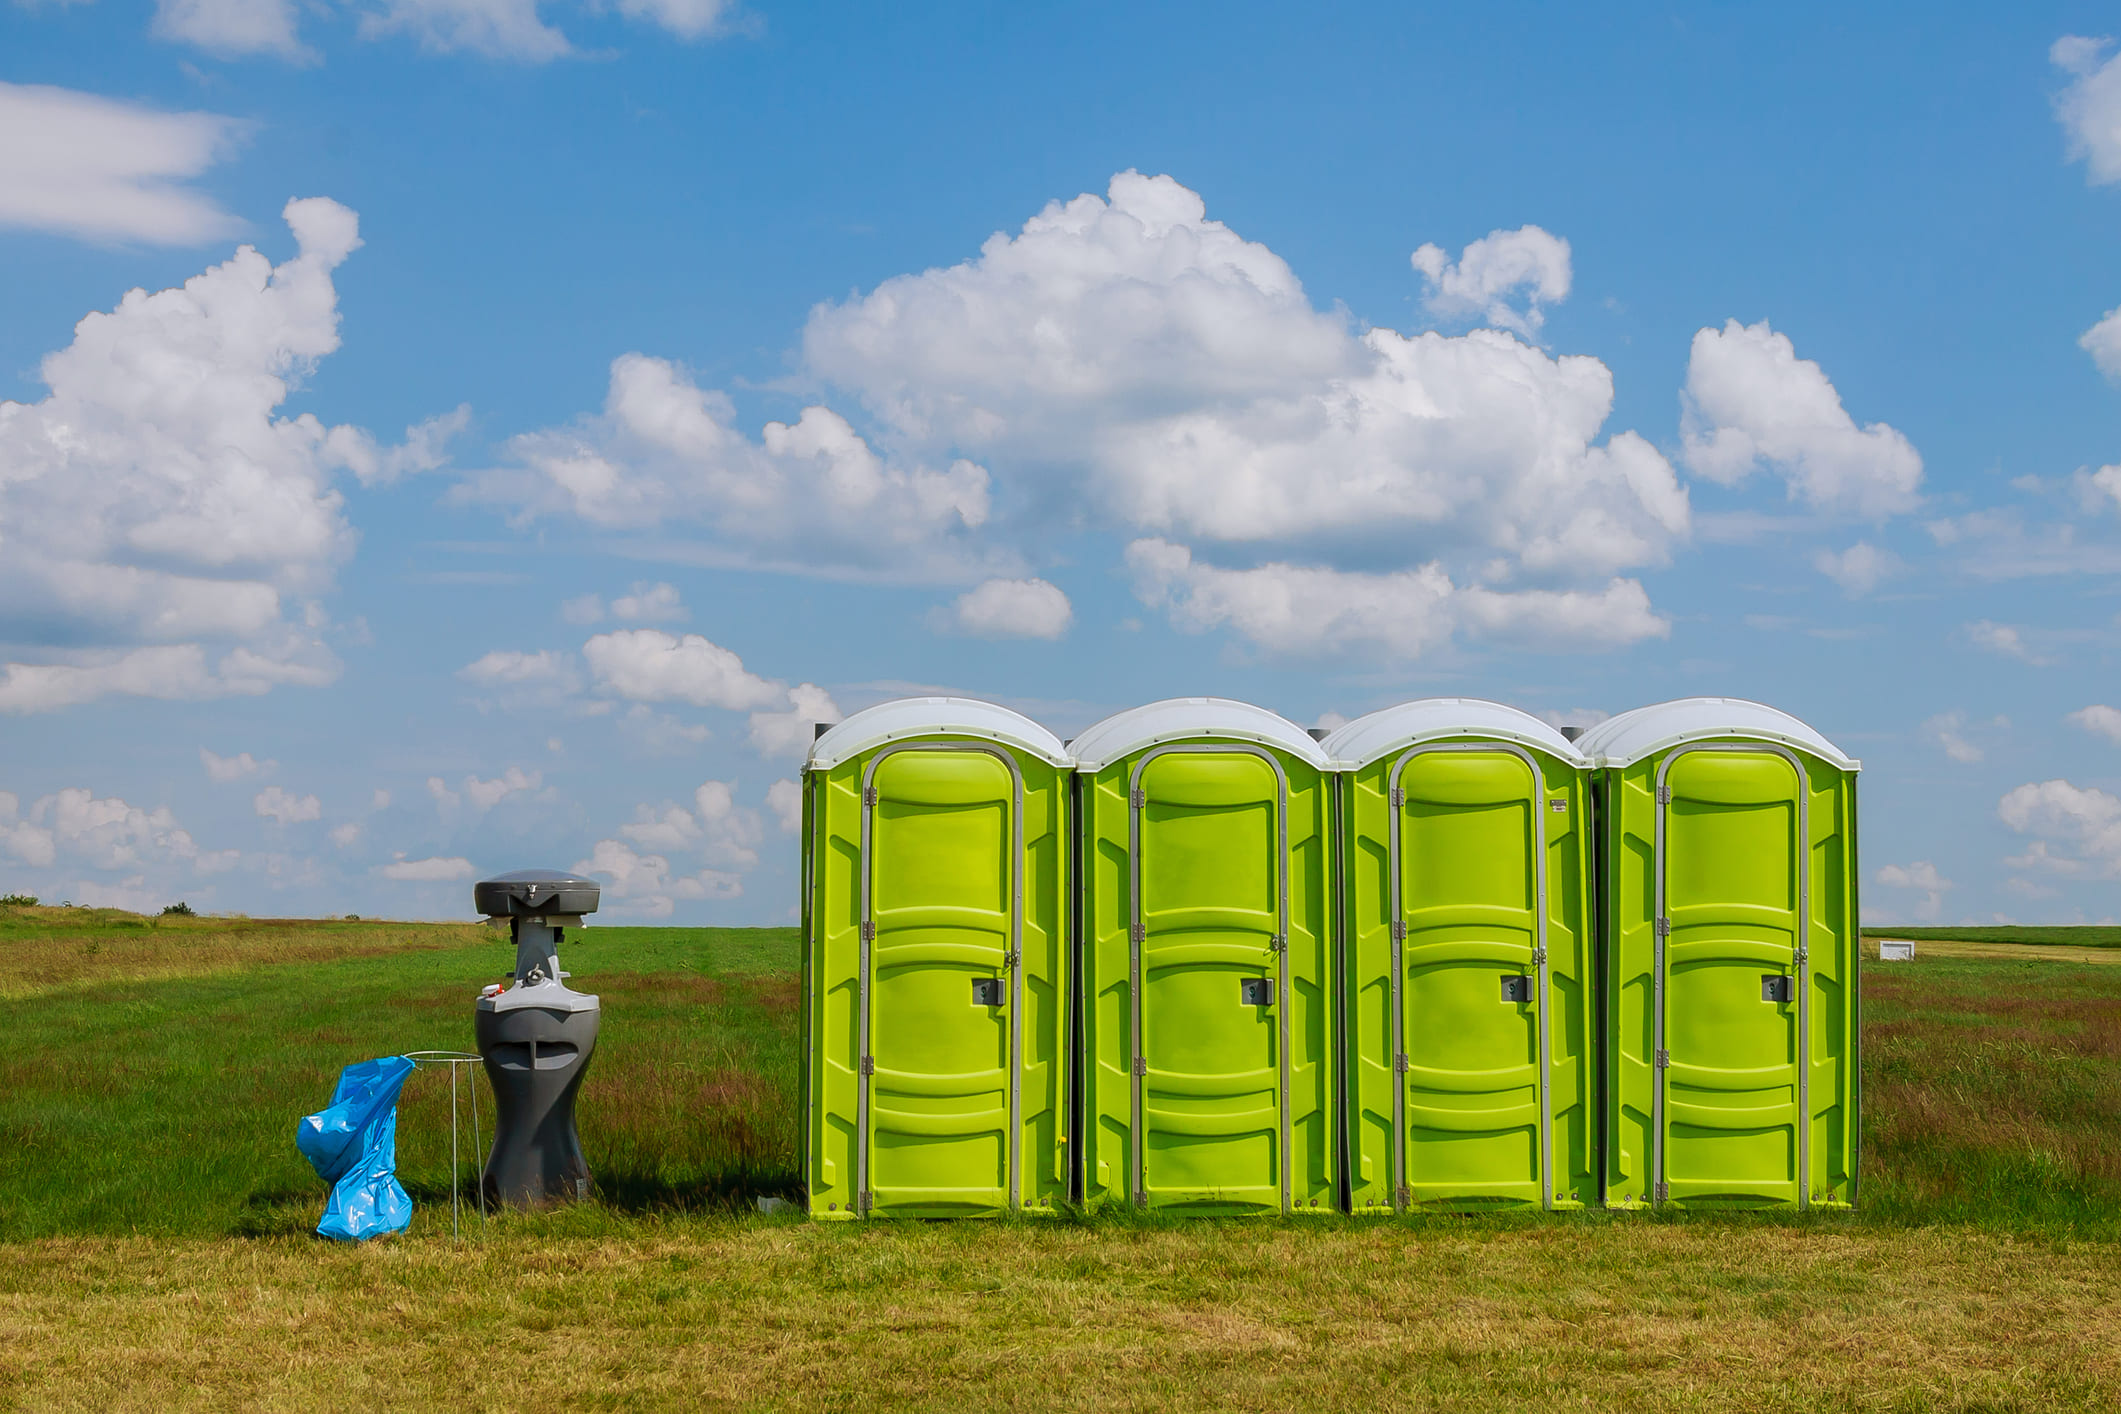 Portable toilet on the grass on a background of clouds